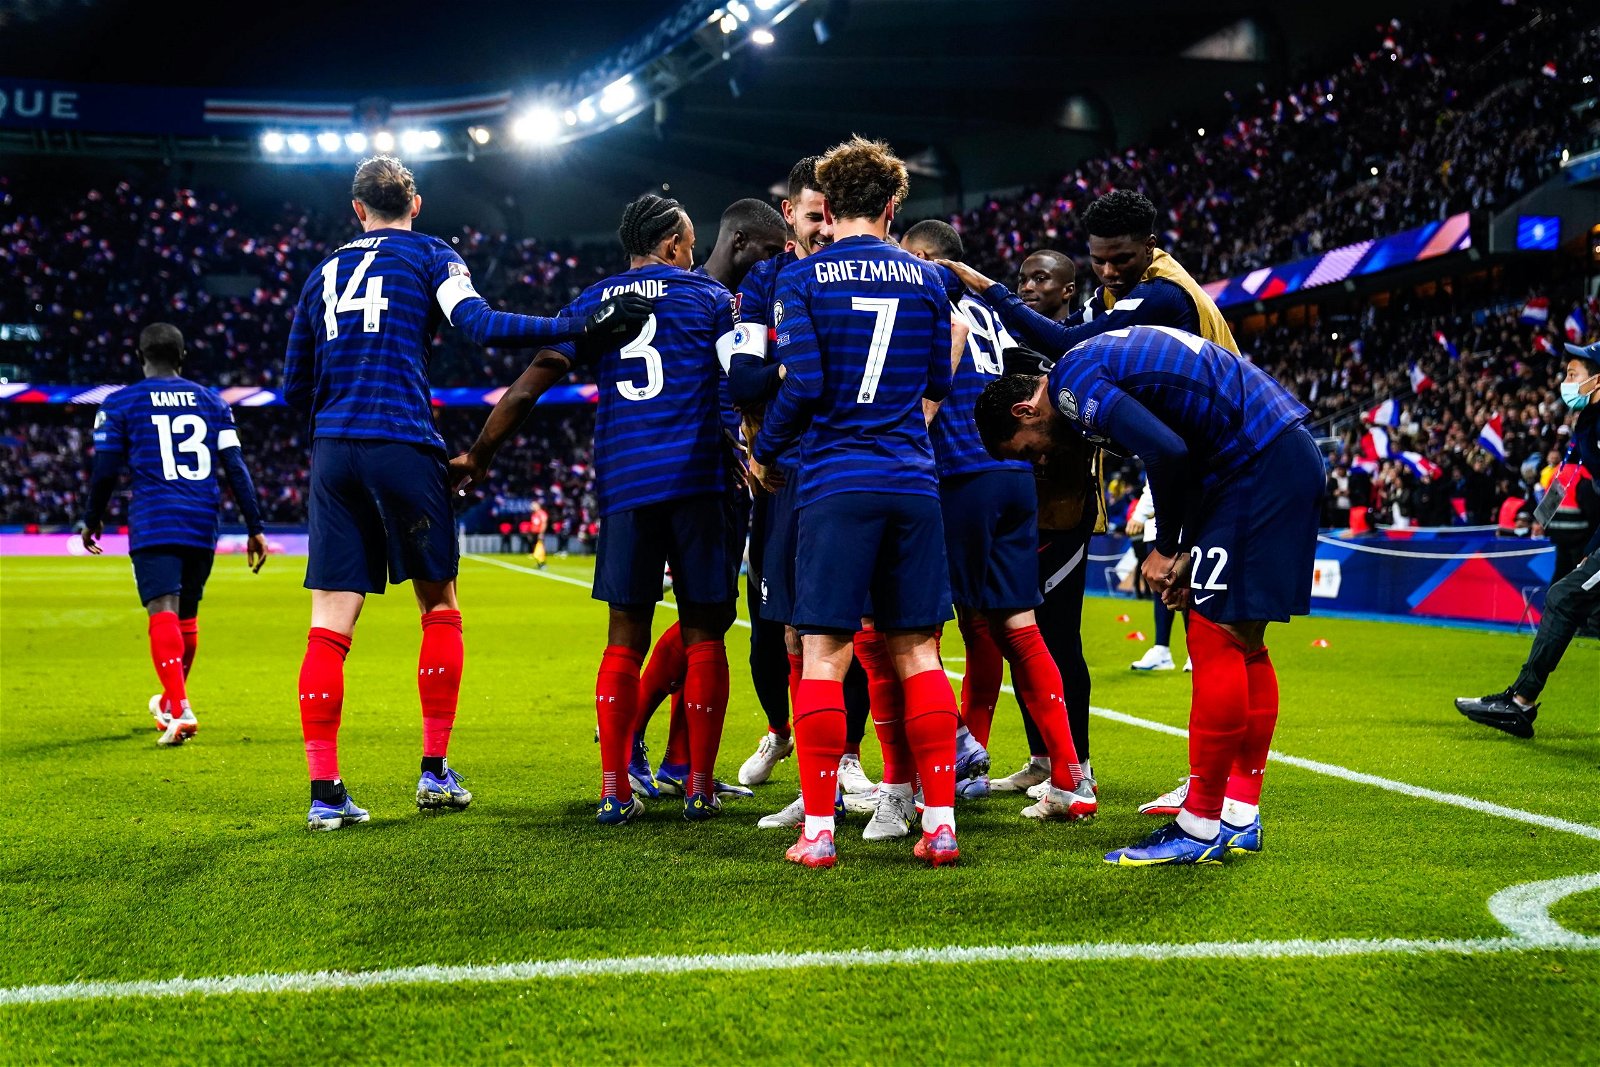 France vs South Africa Predicted Starting Lineup, Squads Formation & Team News